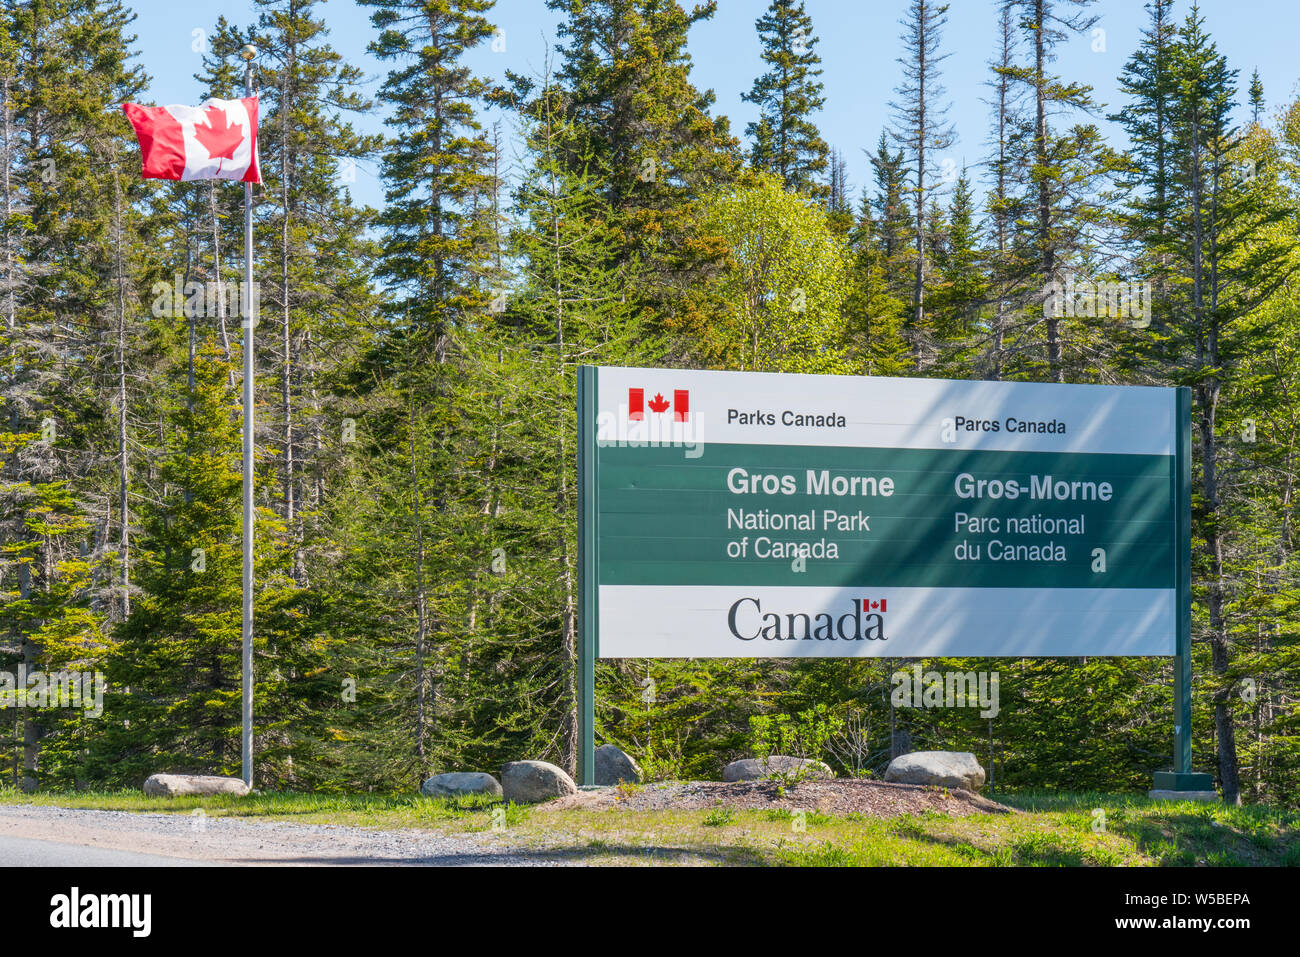 Wiltondale, Newfoundland - June 11, 2019: Welcome sign at the entrance to Gros Morne National Park in Newfoundland, Canada Stock Photo